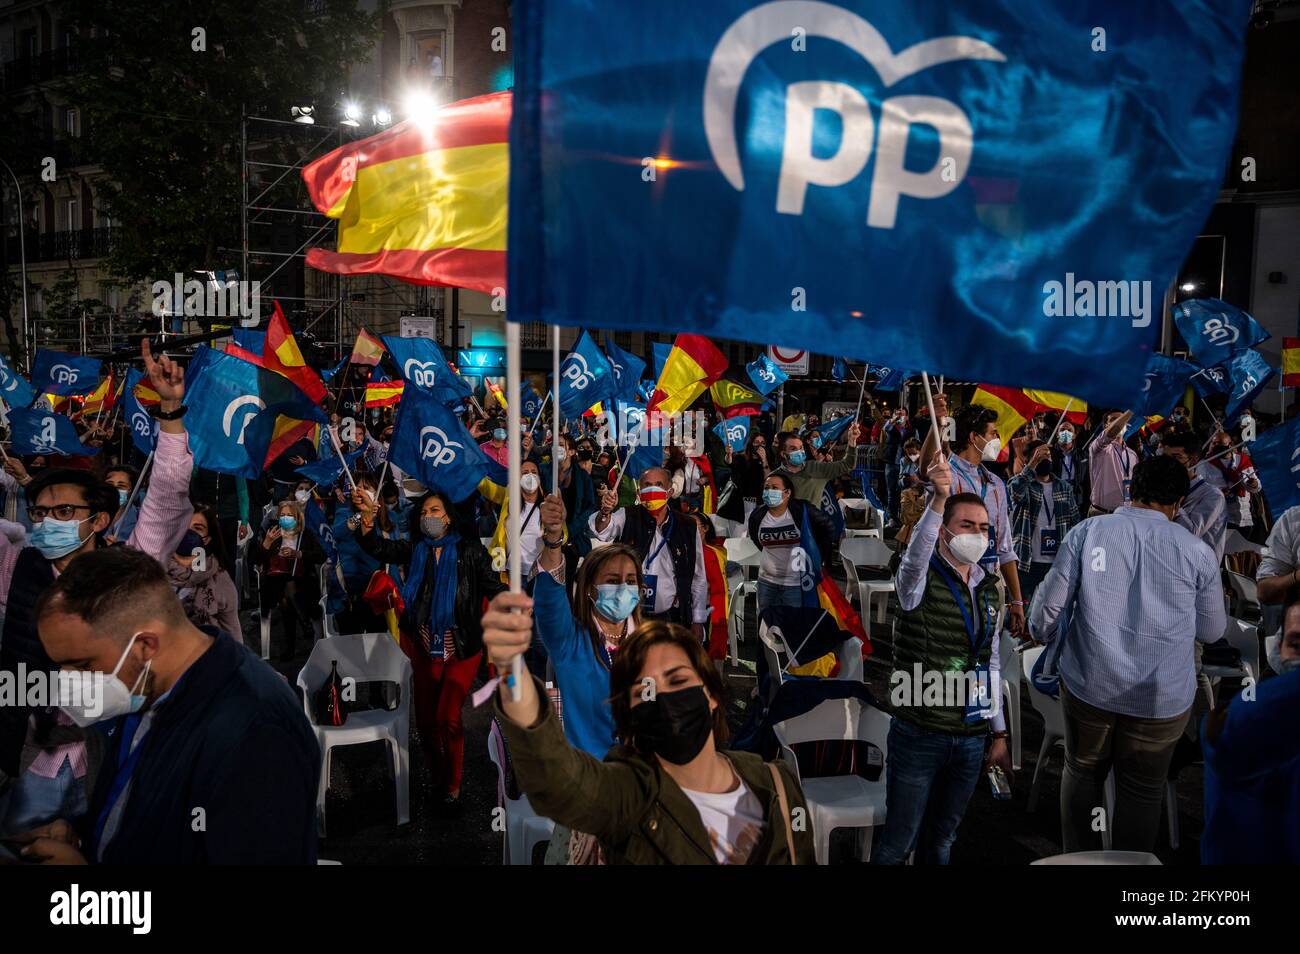 Madrid, Spain. 04th May, 2021. Supporters of Popular Party (PP) waving flags as they follow the results of the Regional elections of the Community of Madrid outside Popular Party Headquarters. Citizens of Madrid were called today for voting in regional elections and Popular Party Candidate Isabel Diaz Ayuso won a resounding victory with 45% of the votes. Credit: Marcos del Mazo/Alamy Live News Stock Photo